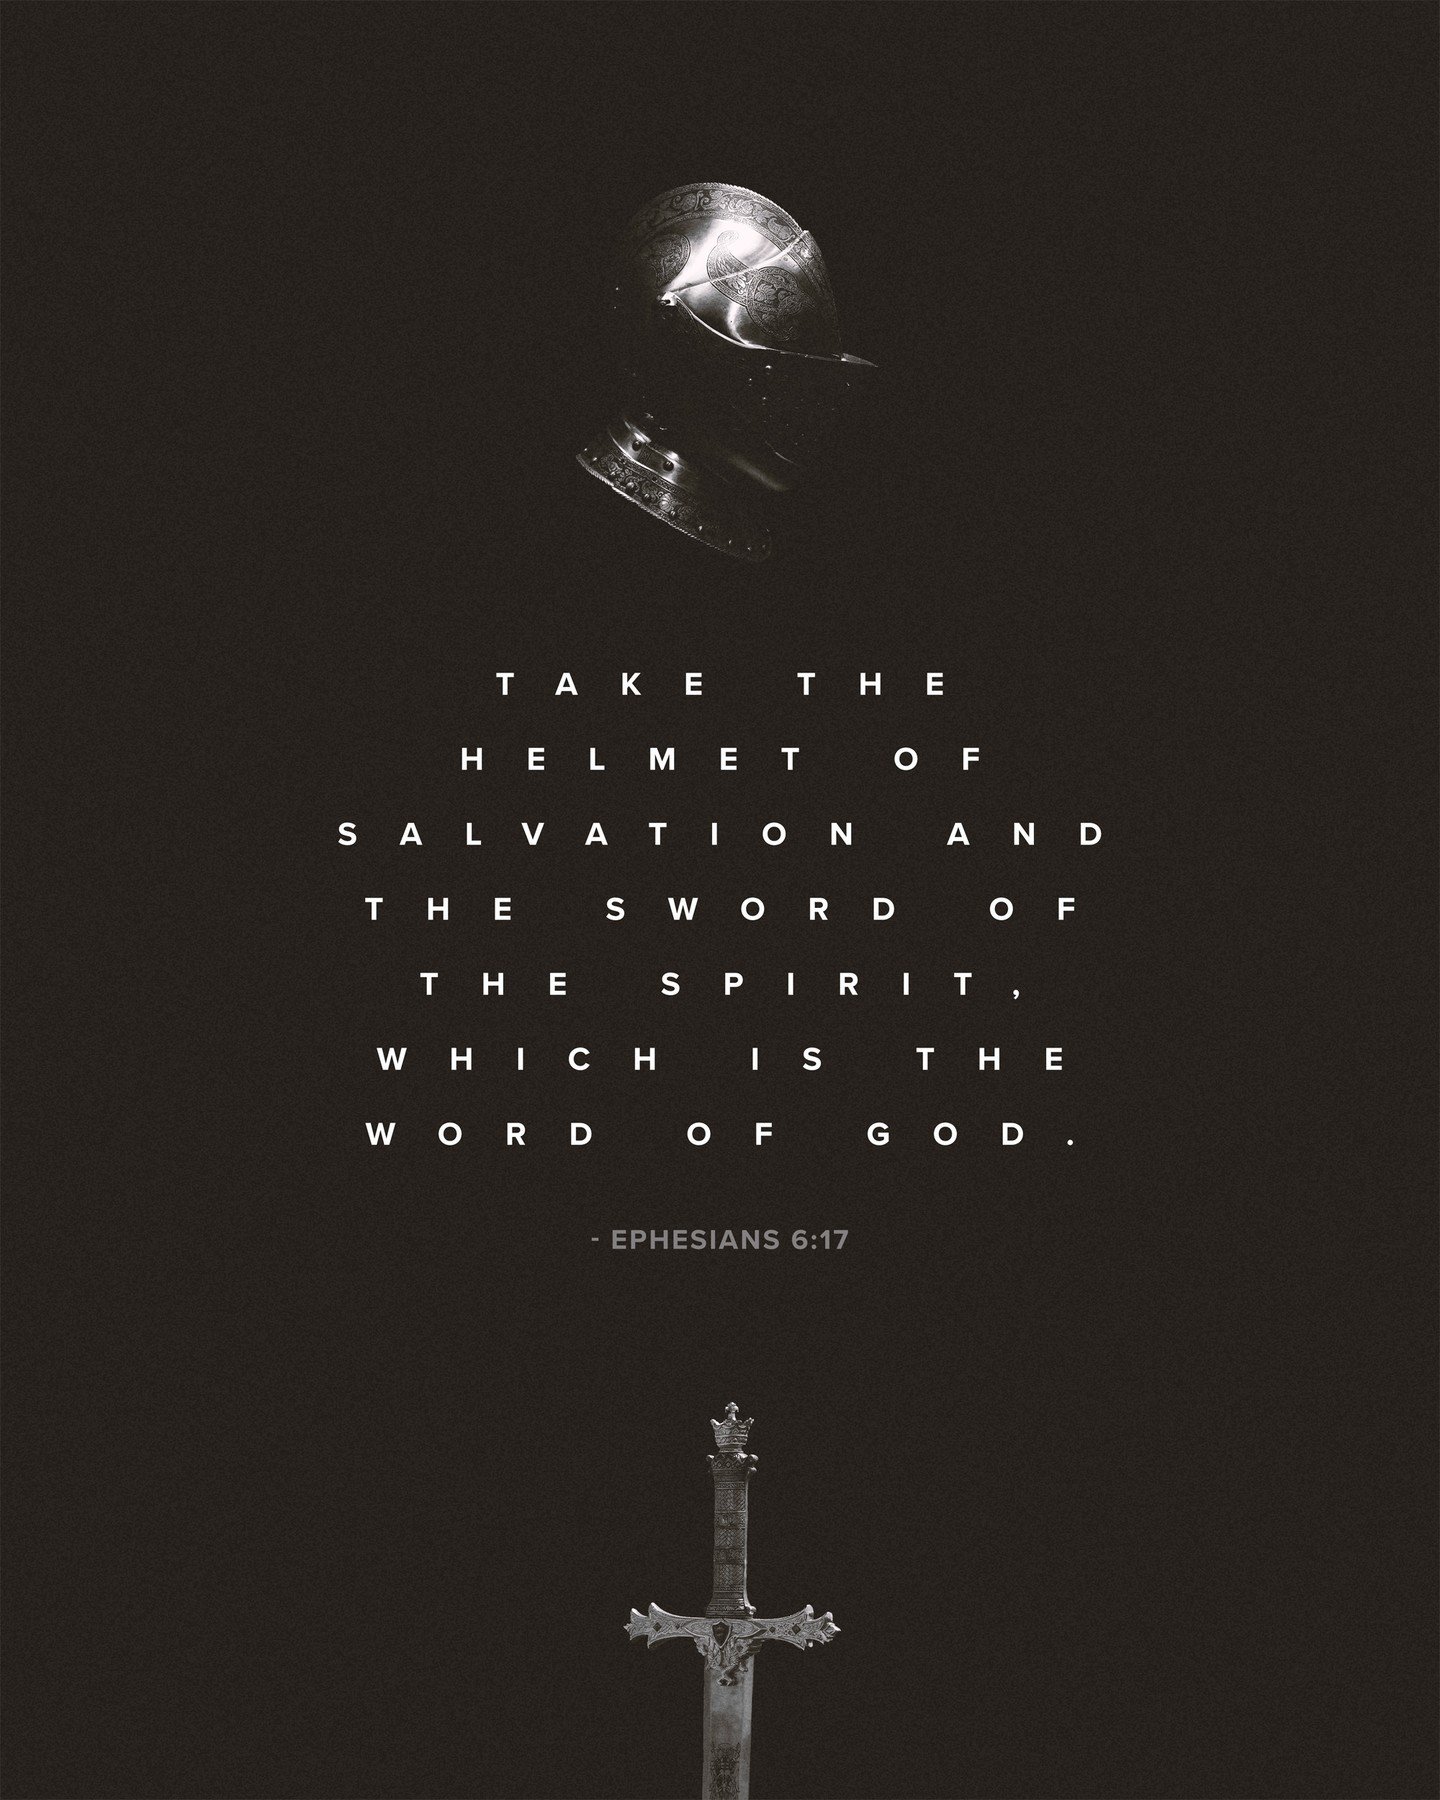 &quot;Take the helmet of salvation and the sword of the Spirit, which is the word of God.&quot; - Ephesians 6:17
.
.
.
#church #god #morning #jesus #christ #love #christian #worship #bible #ephesians